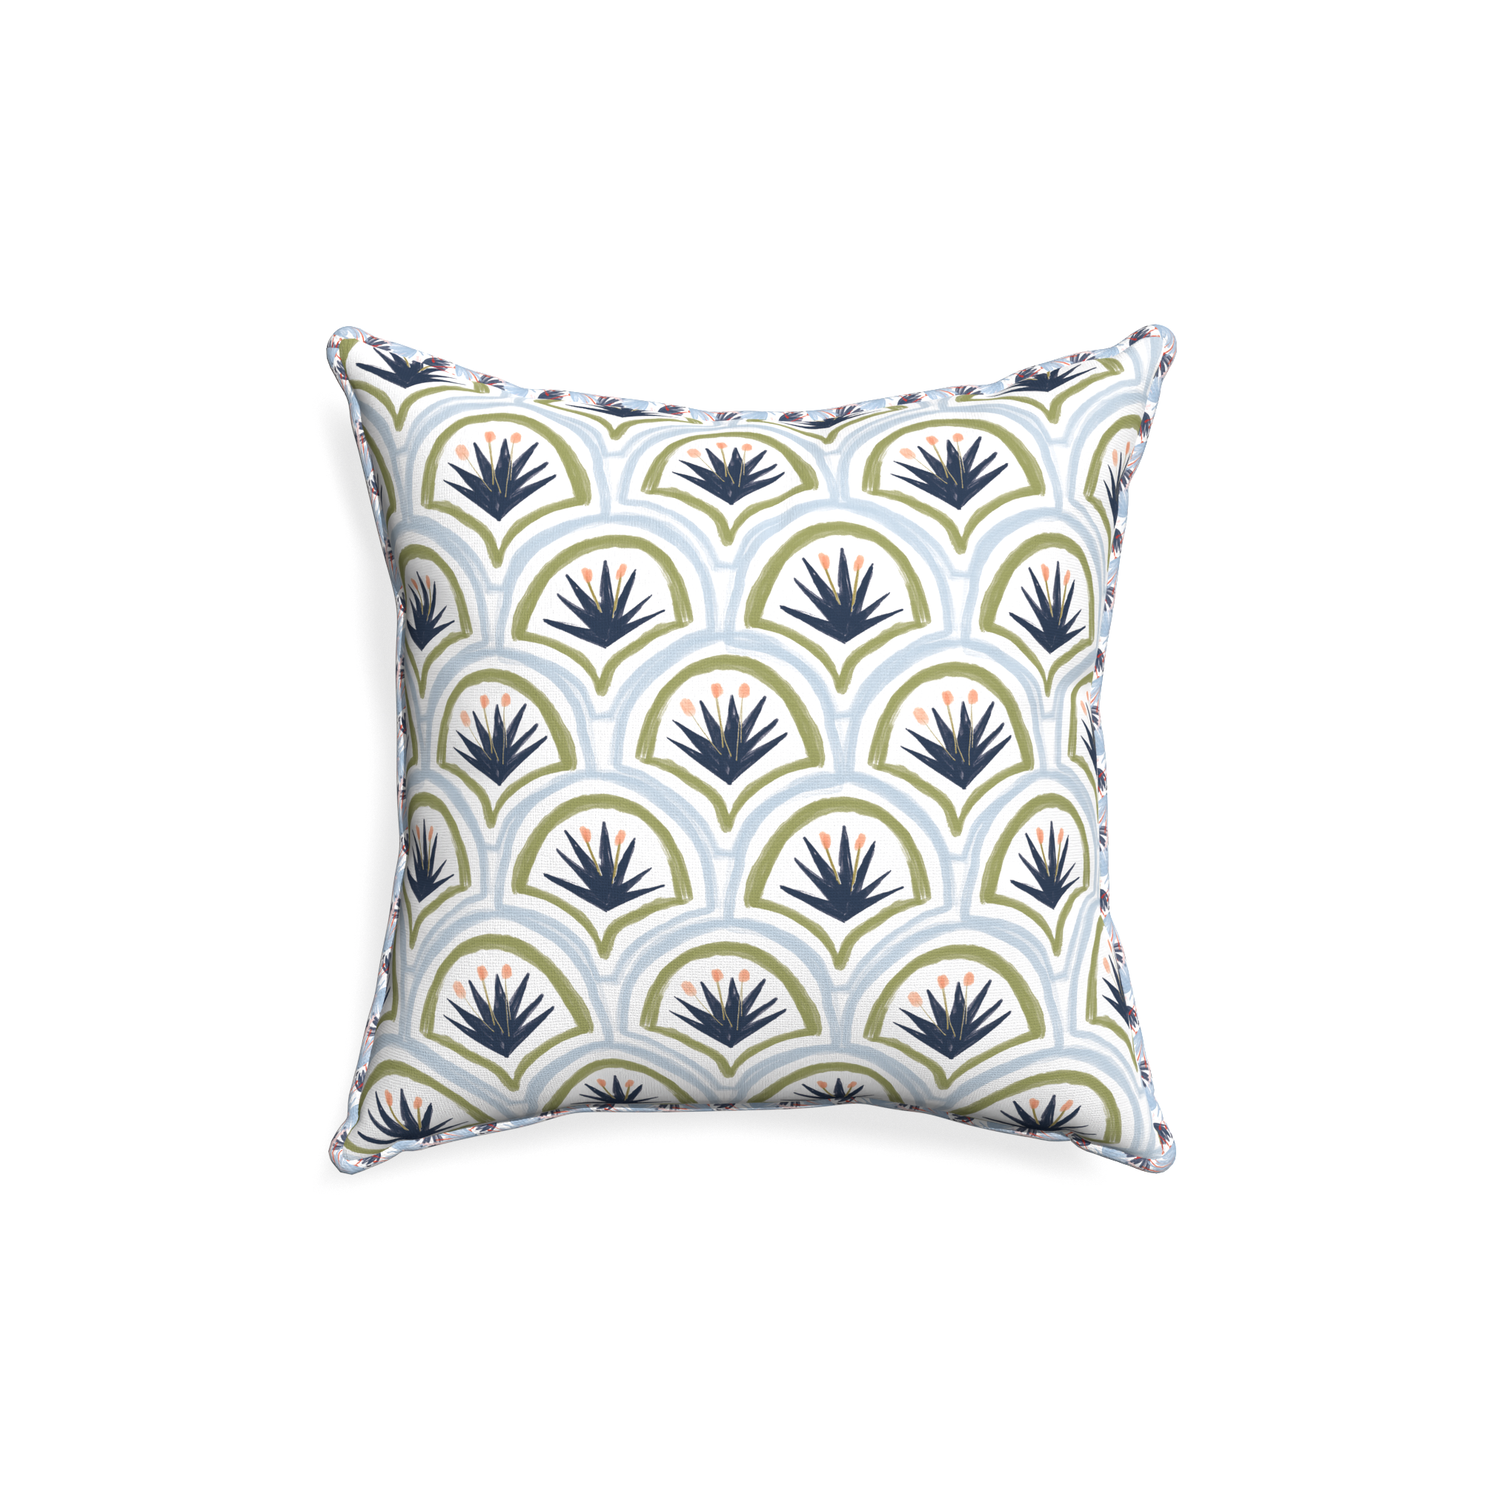 18-square thatcher midnight custom art deco palm patternpillow with e piping on white background